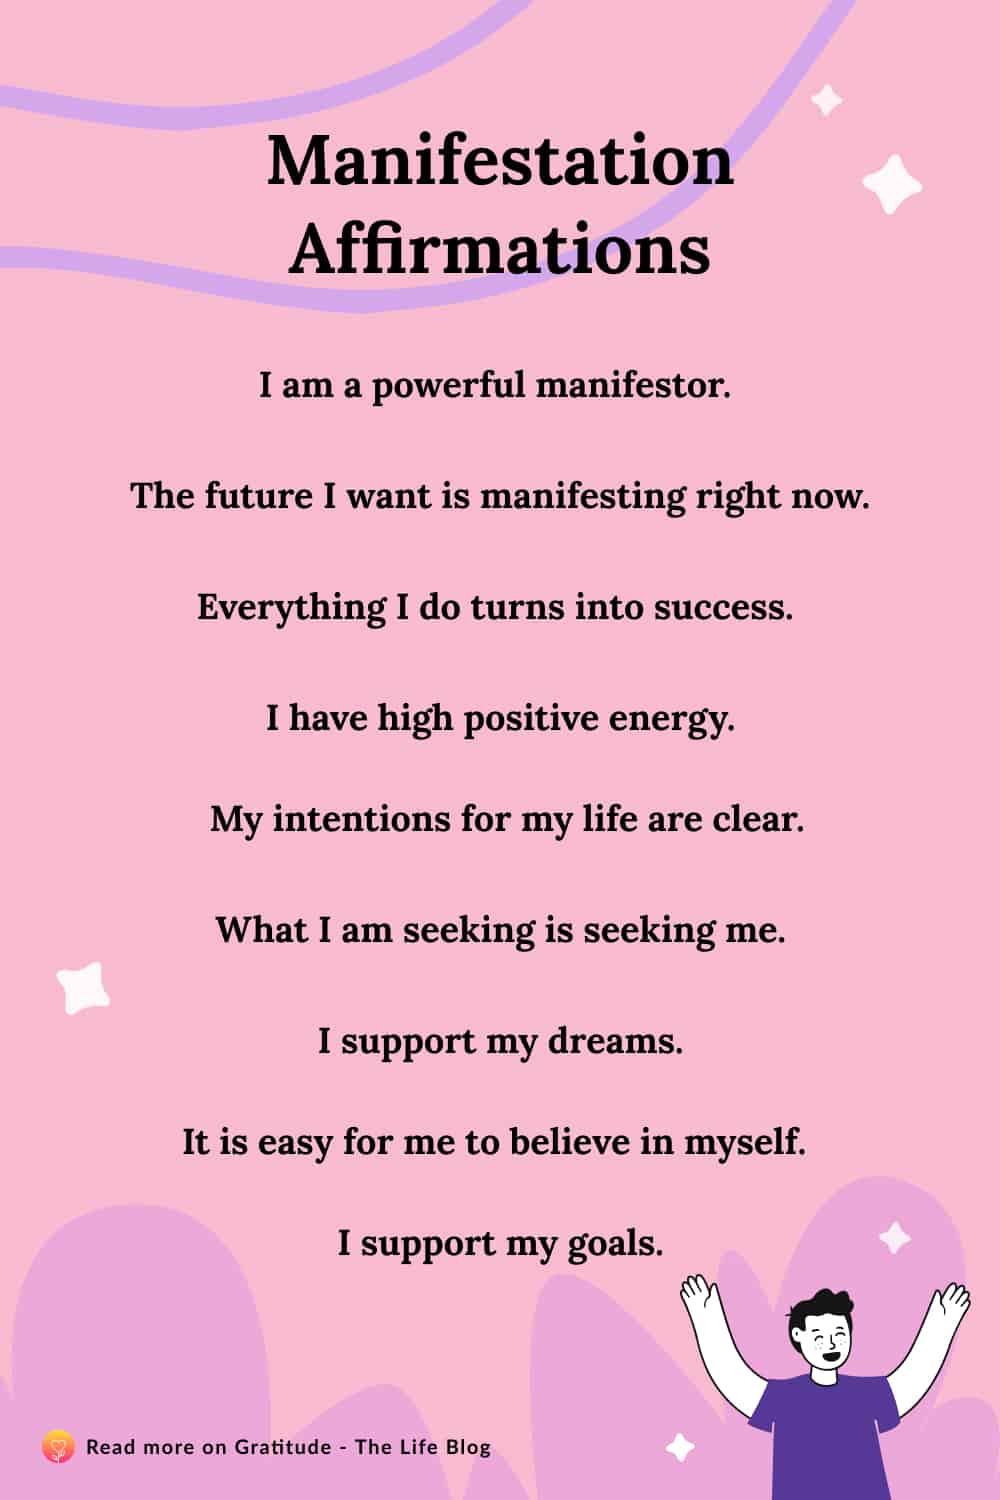 List with image of manifestation affirmations